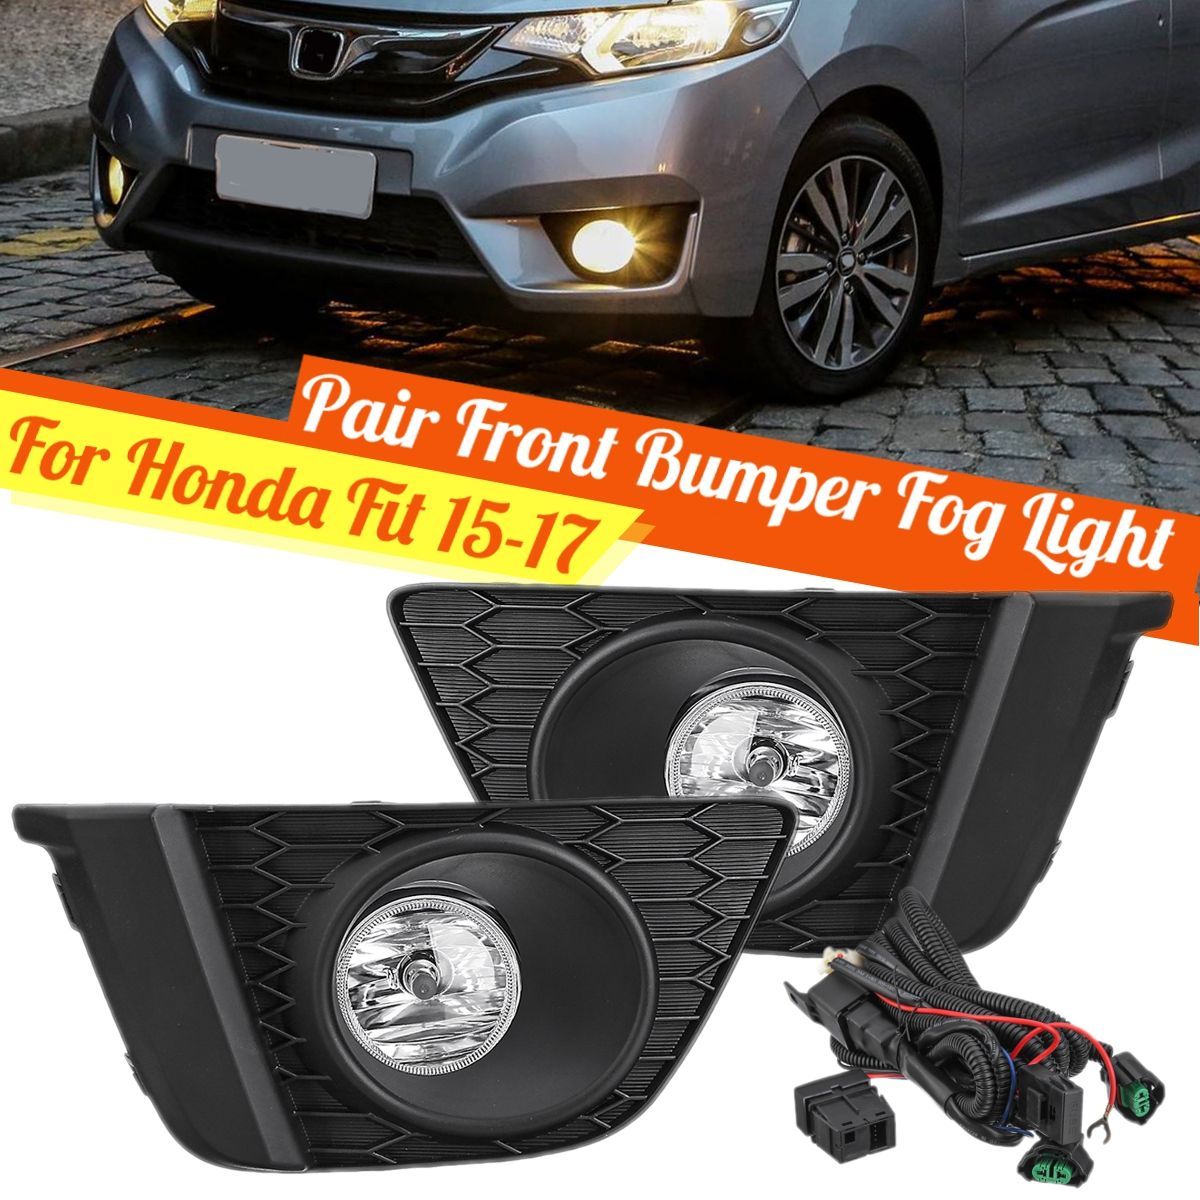 Front-Bumper-Fog-Light-Lamps-With-BulbsSwitchCover-Kit-For-Honda-Fit-2015-2017-1754864